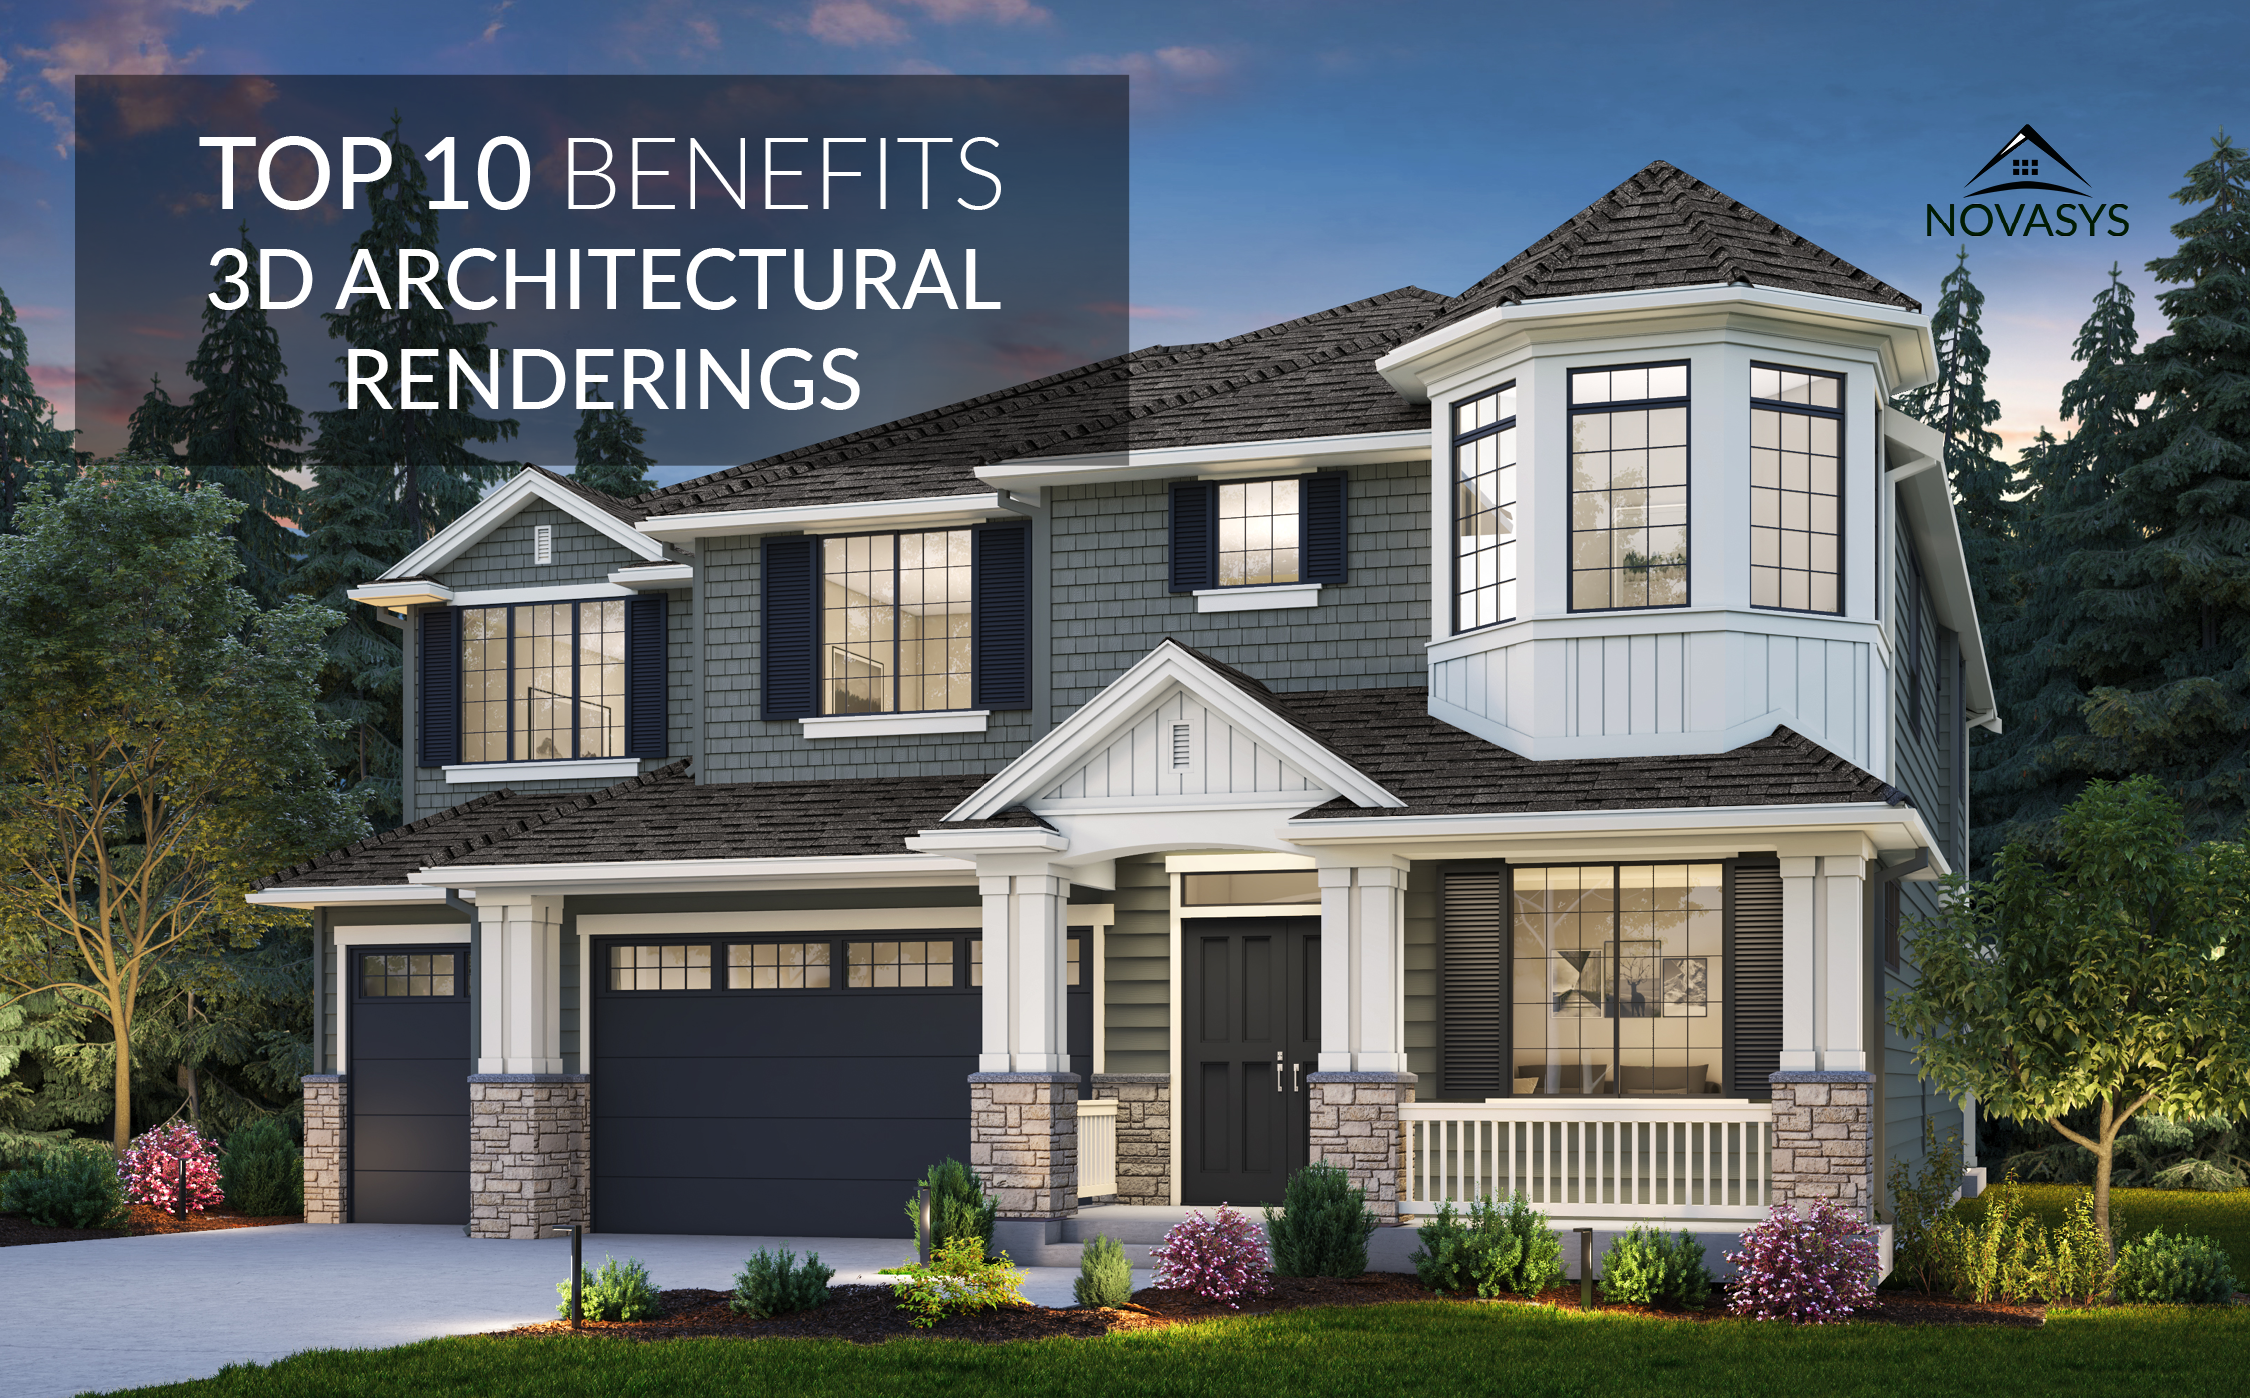 Top 10 Benefits of 3D Architectural Rendering Services for Real Estate Businesses